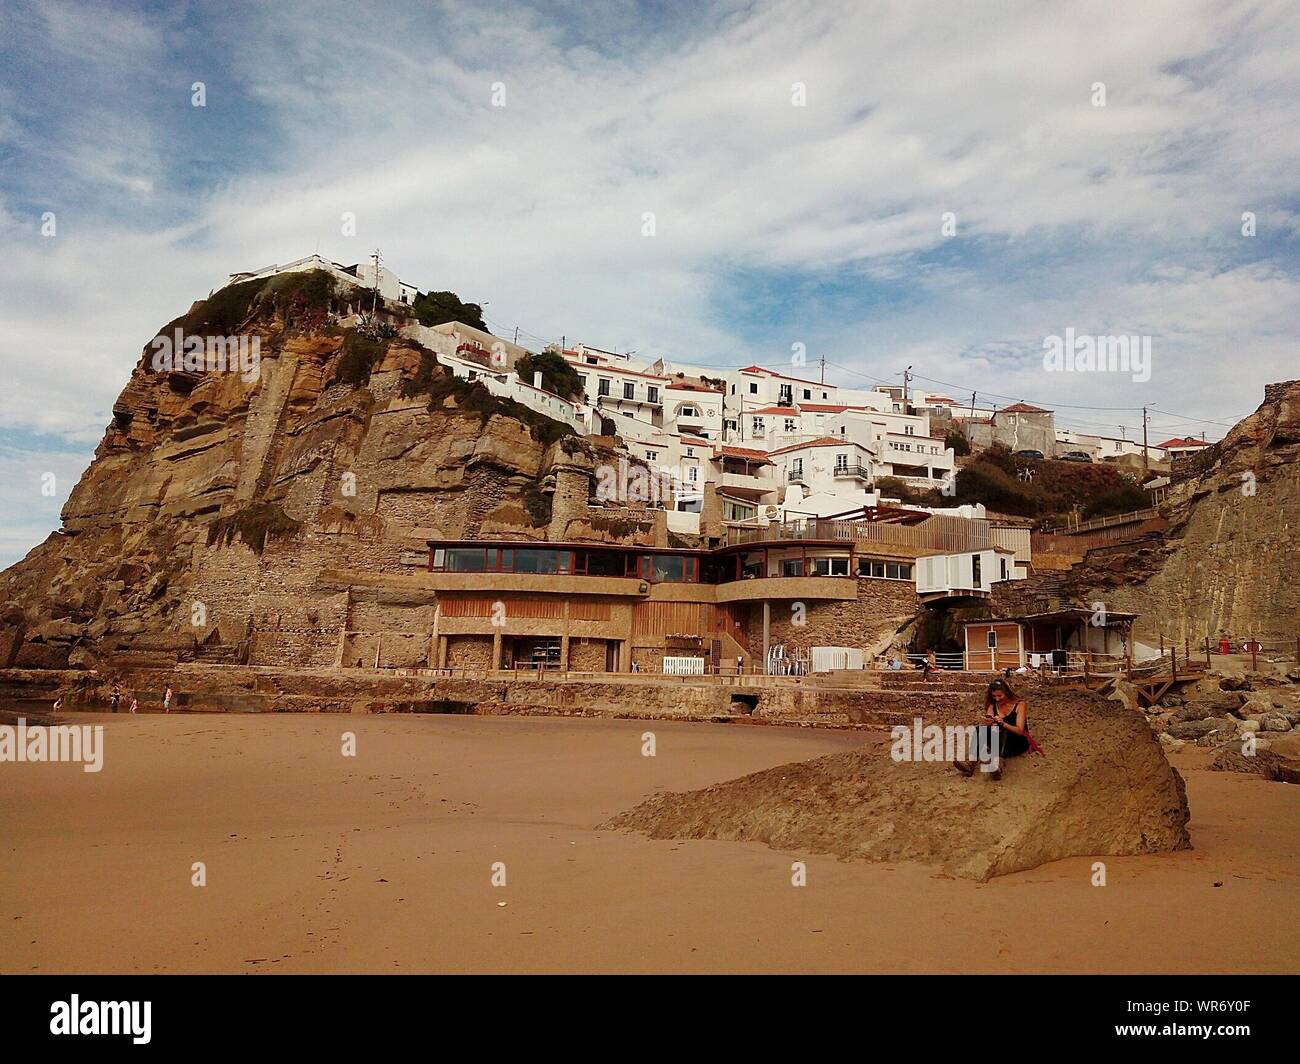 Woman Sitting On Rock Against Buildings At Azenhas Do Mar Stock Photo